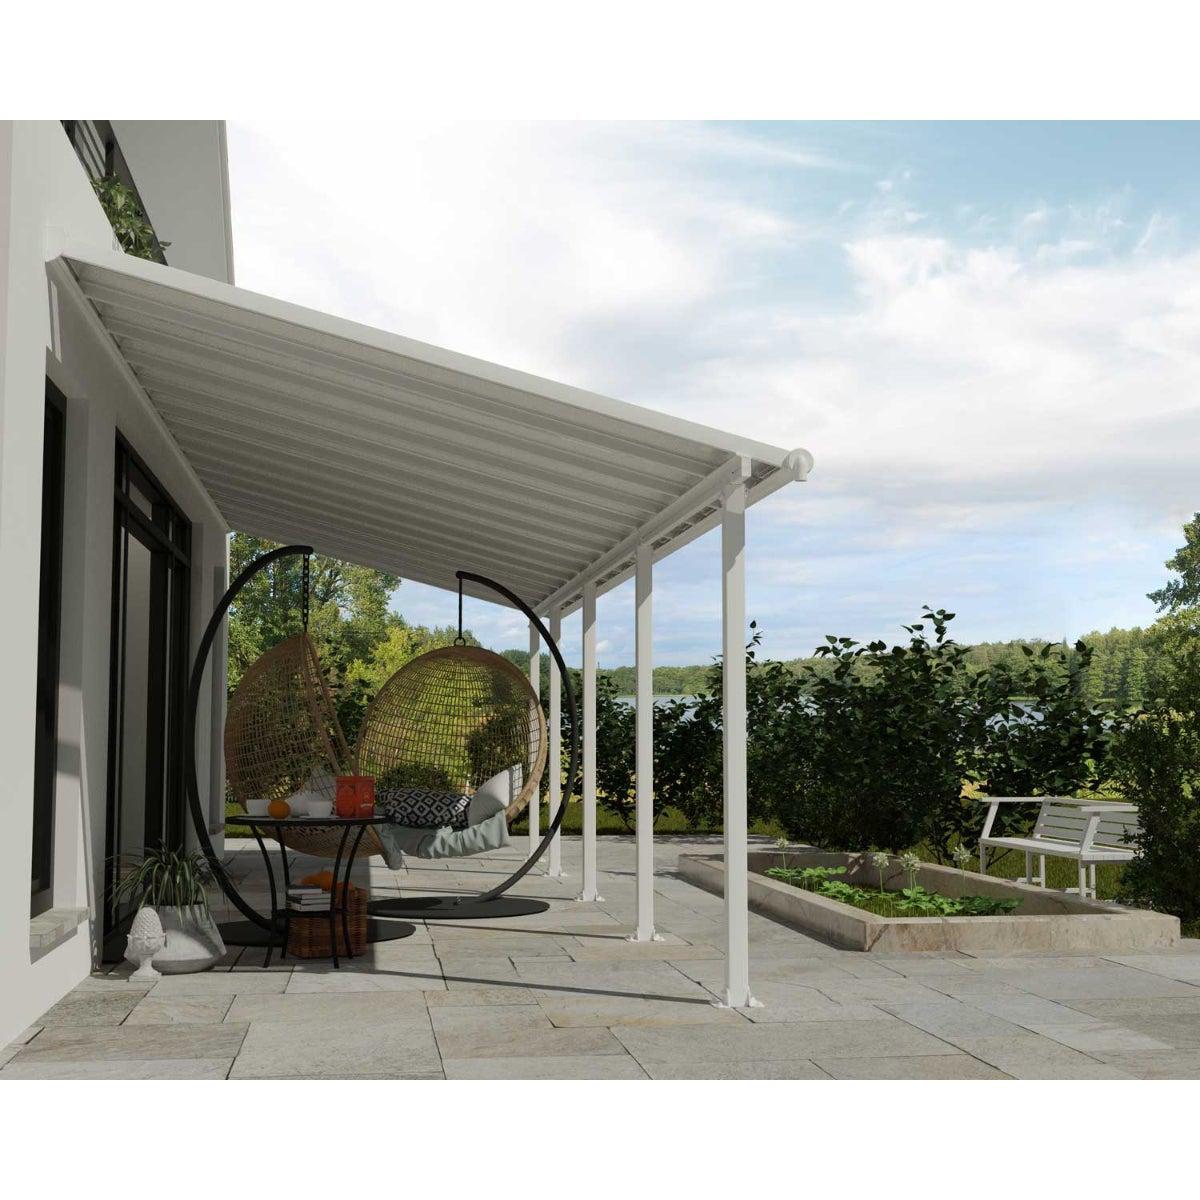 Olympia Patio Covers 10 x 28 ft. | Palram-Canopia - Delightful Yard